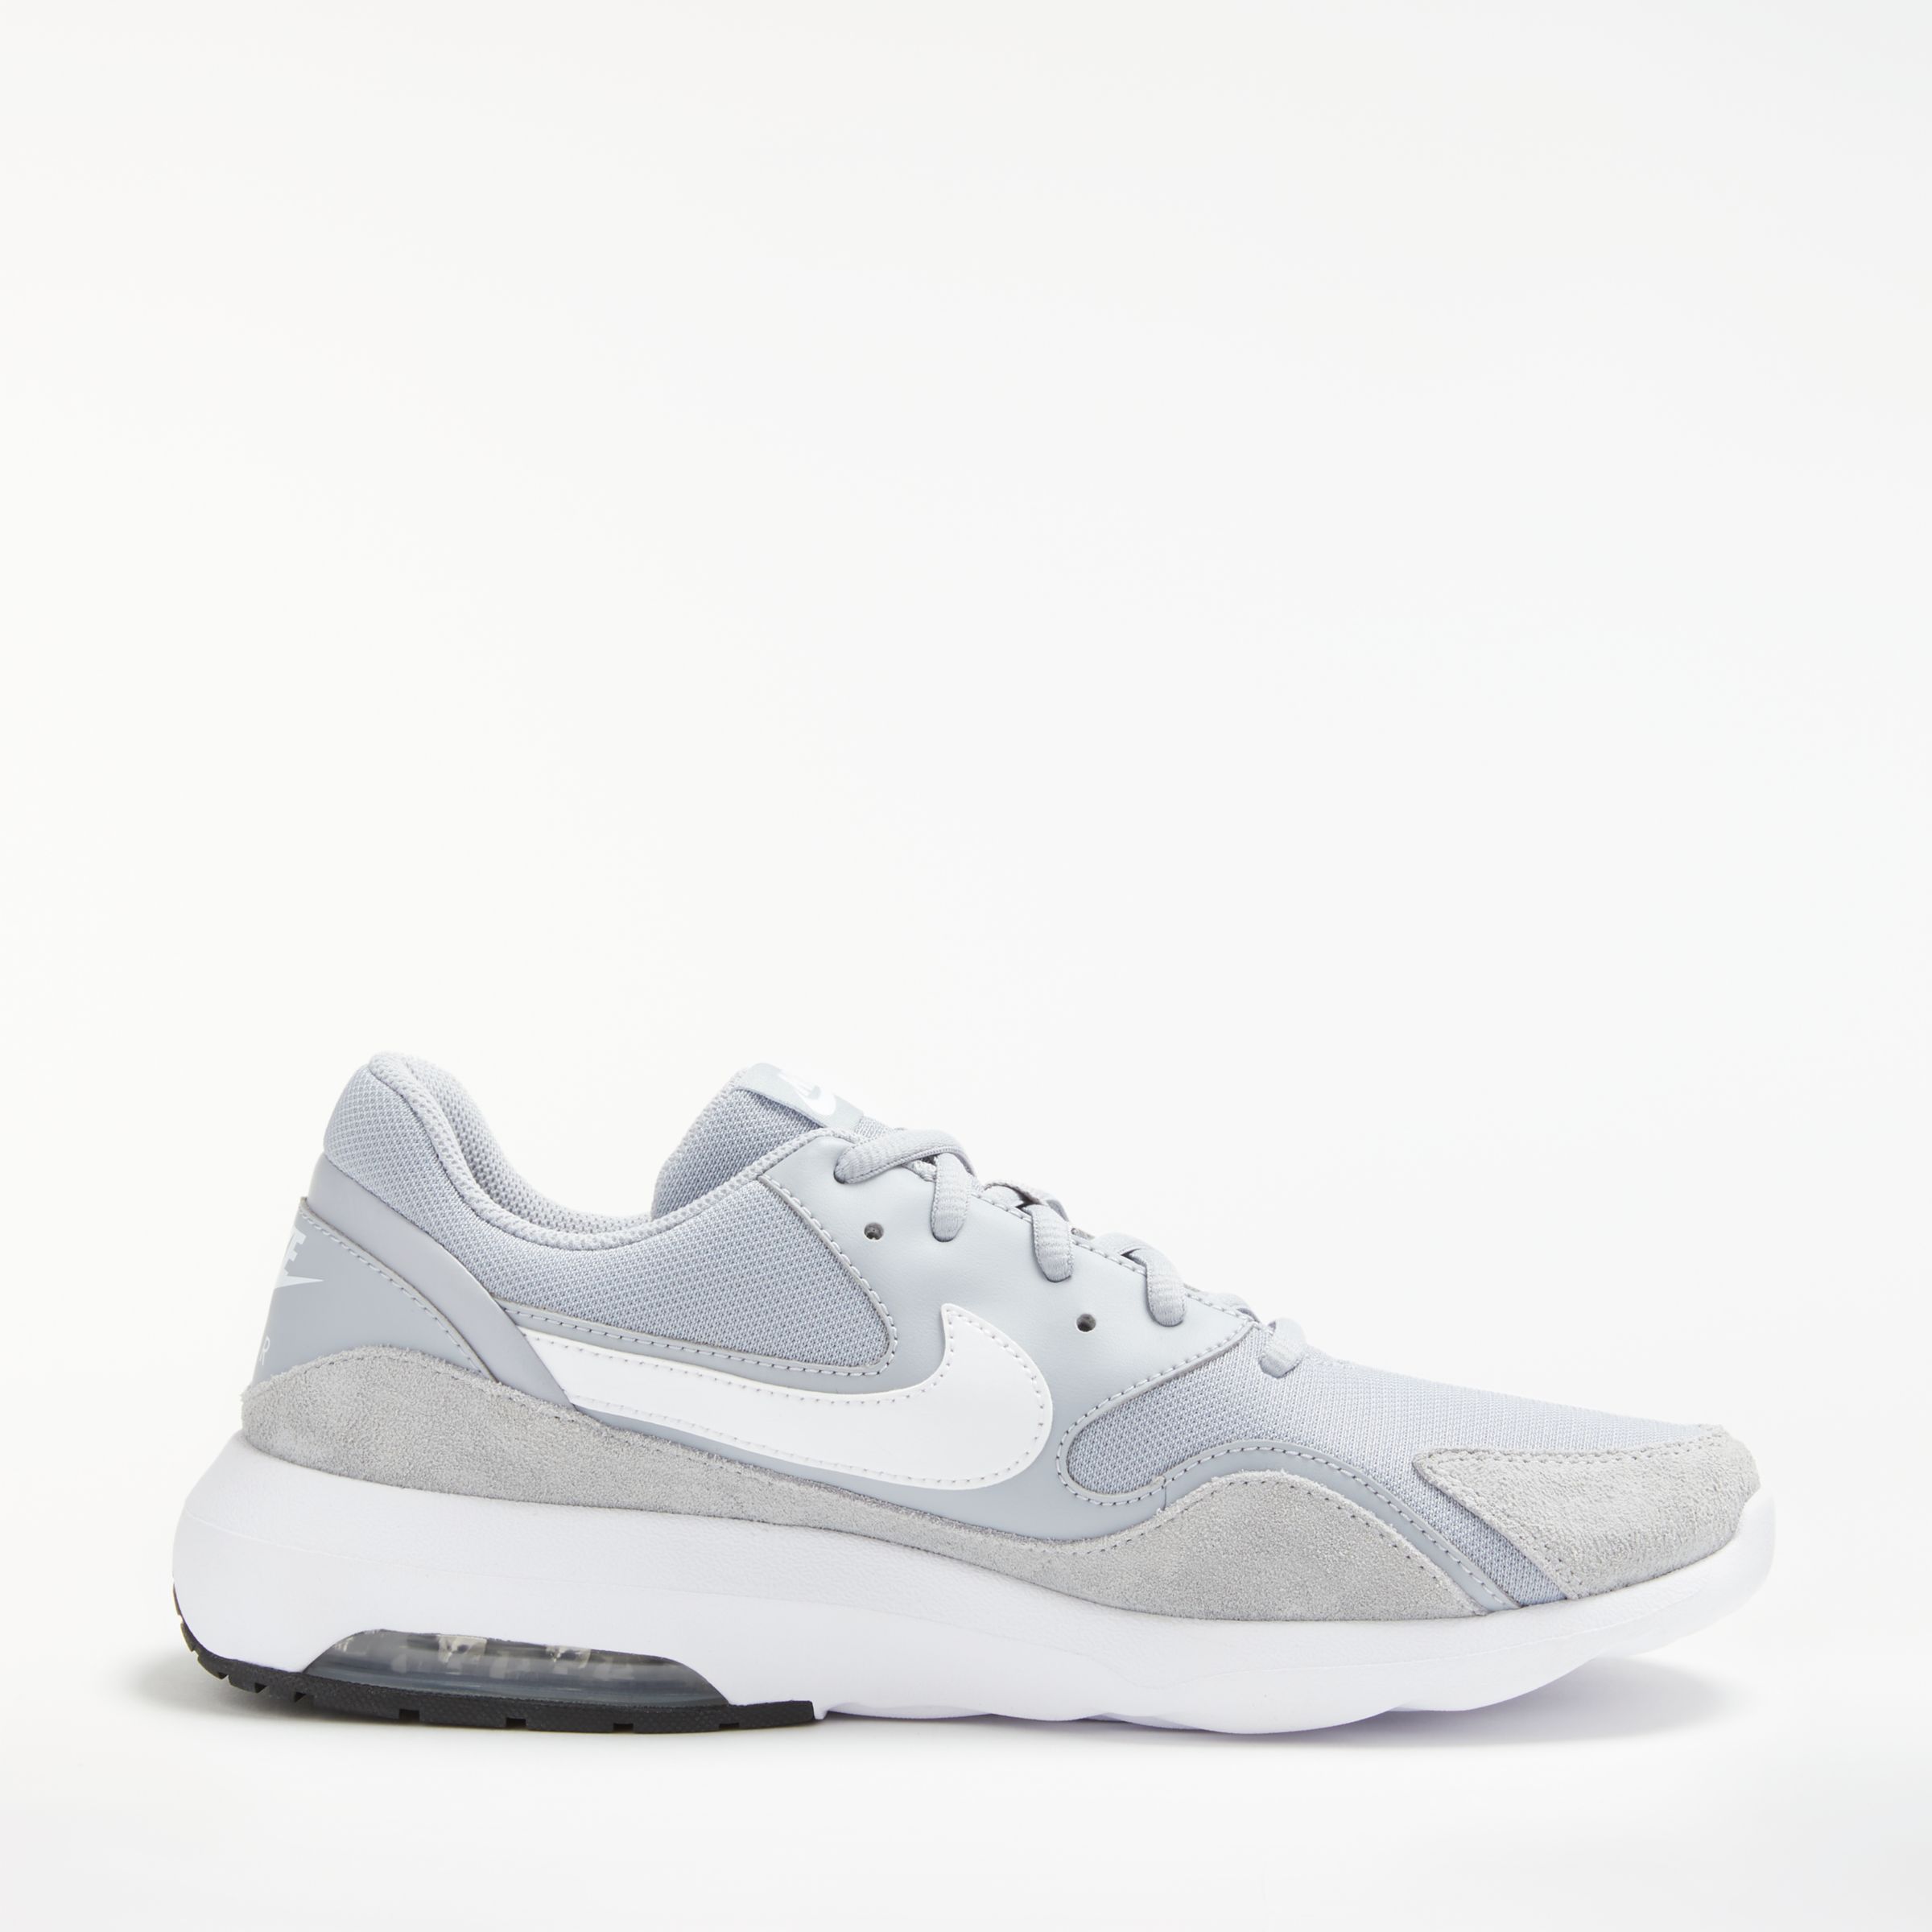 Nike Air Max 90 Essential Men's Trainers, Cool Grey/White